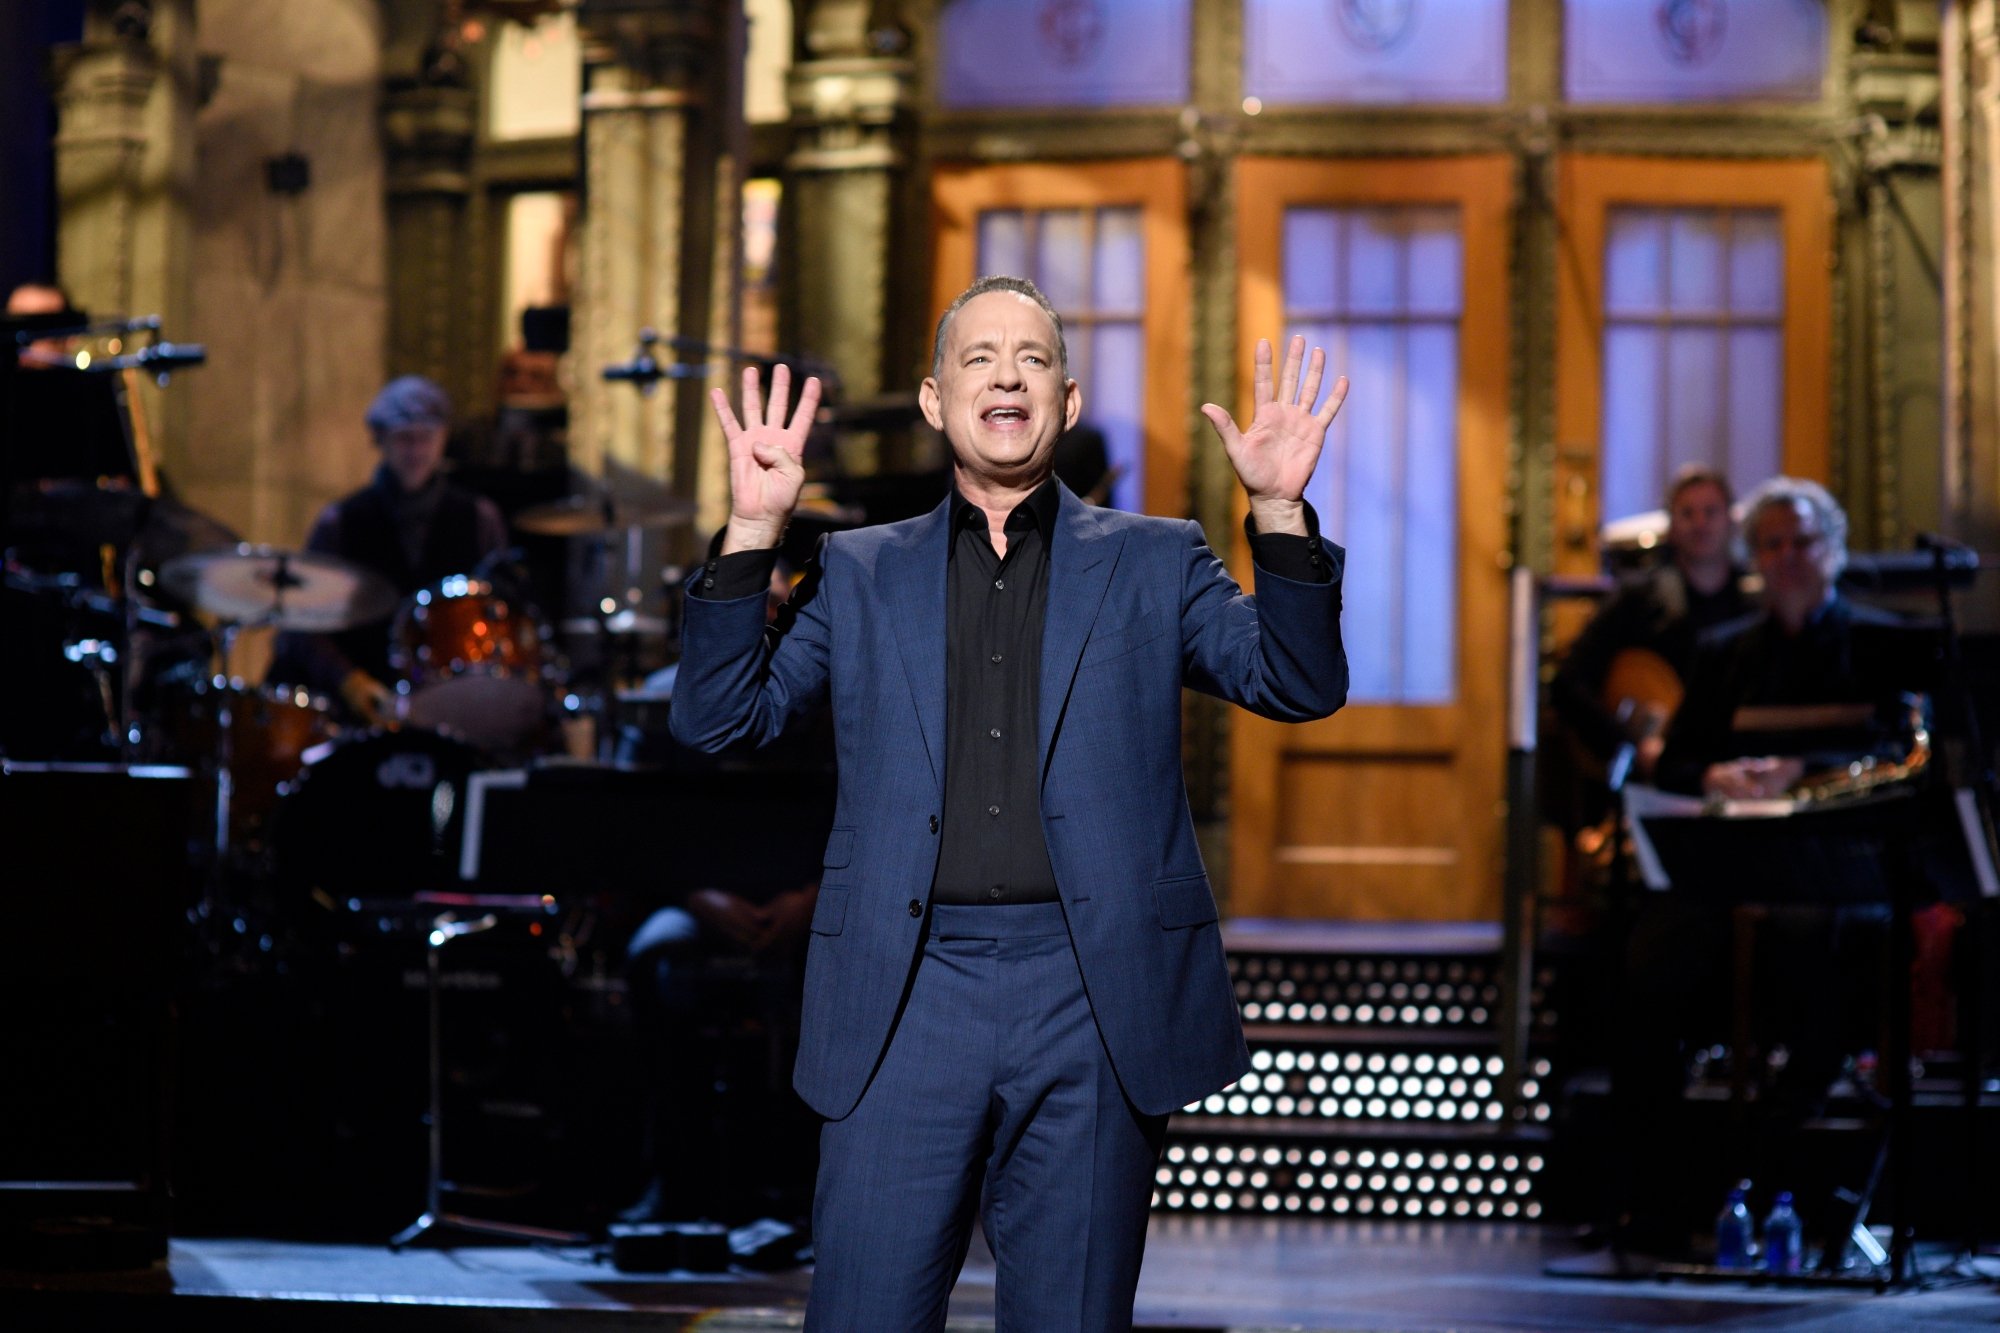 'Saturday Night Live' host Tom Hanks holding up 9 fingers, wearing a navy blue suit and a black collared shirt on the stage.